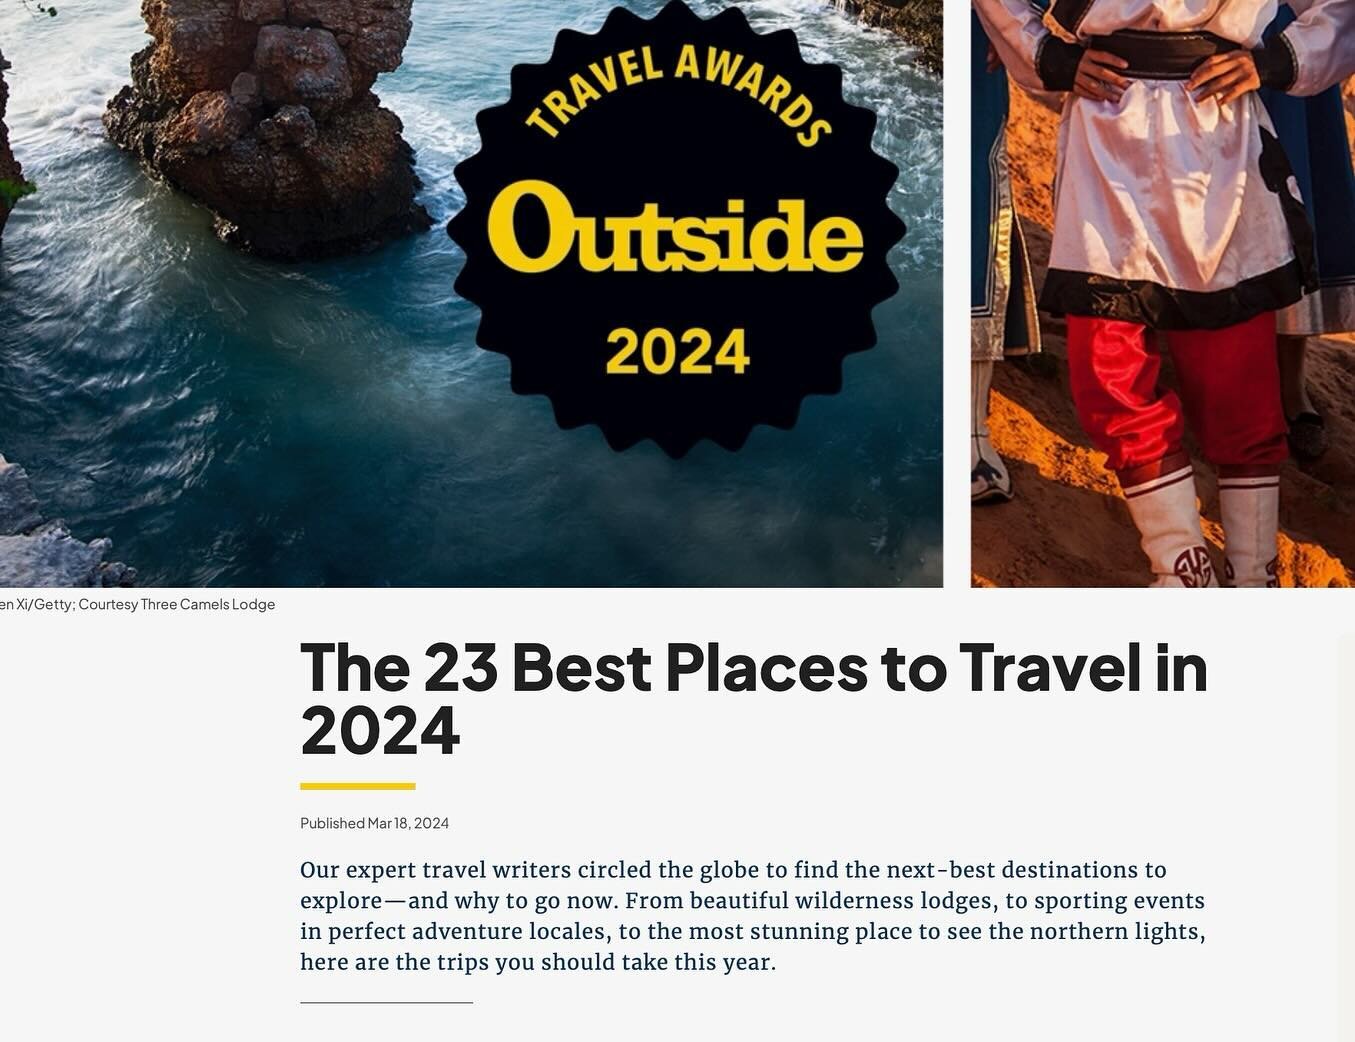 We were thrilled to see two of our Handlebar clients featured in Outside&rsquo;s 2024 Travel Awards for Best Places to Travel. Congrats @visitcolorado and @visittucson for making the list, and a big thanks to @jenrunsworld and @meganmichelson for you